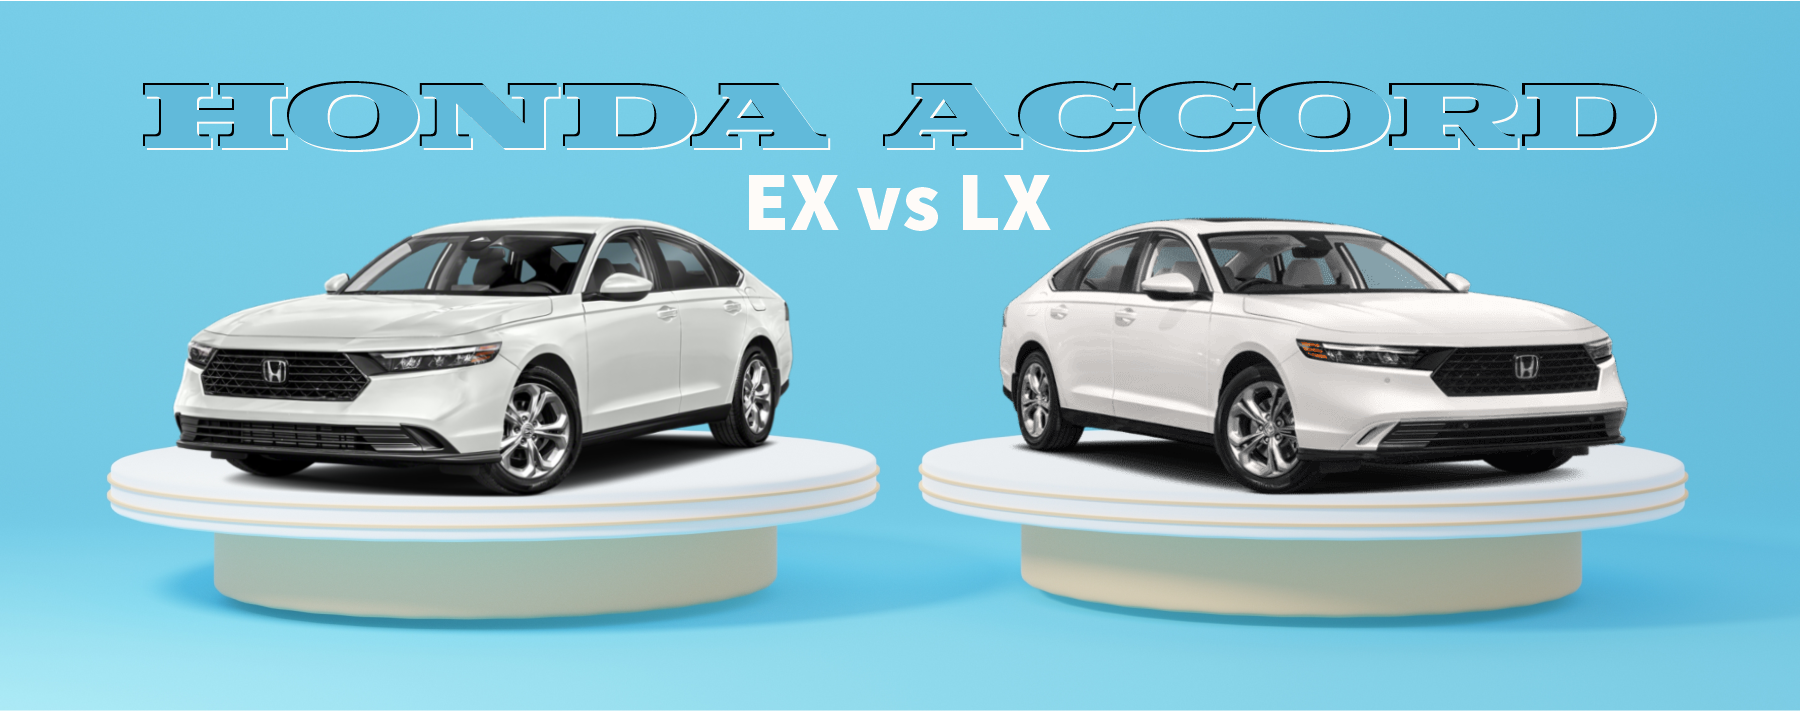 The Honda Accord LX vs EX Guide What’s the Difference?